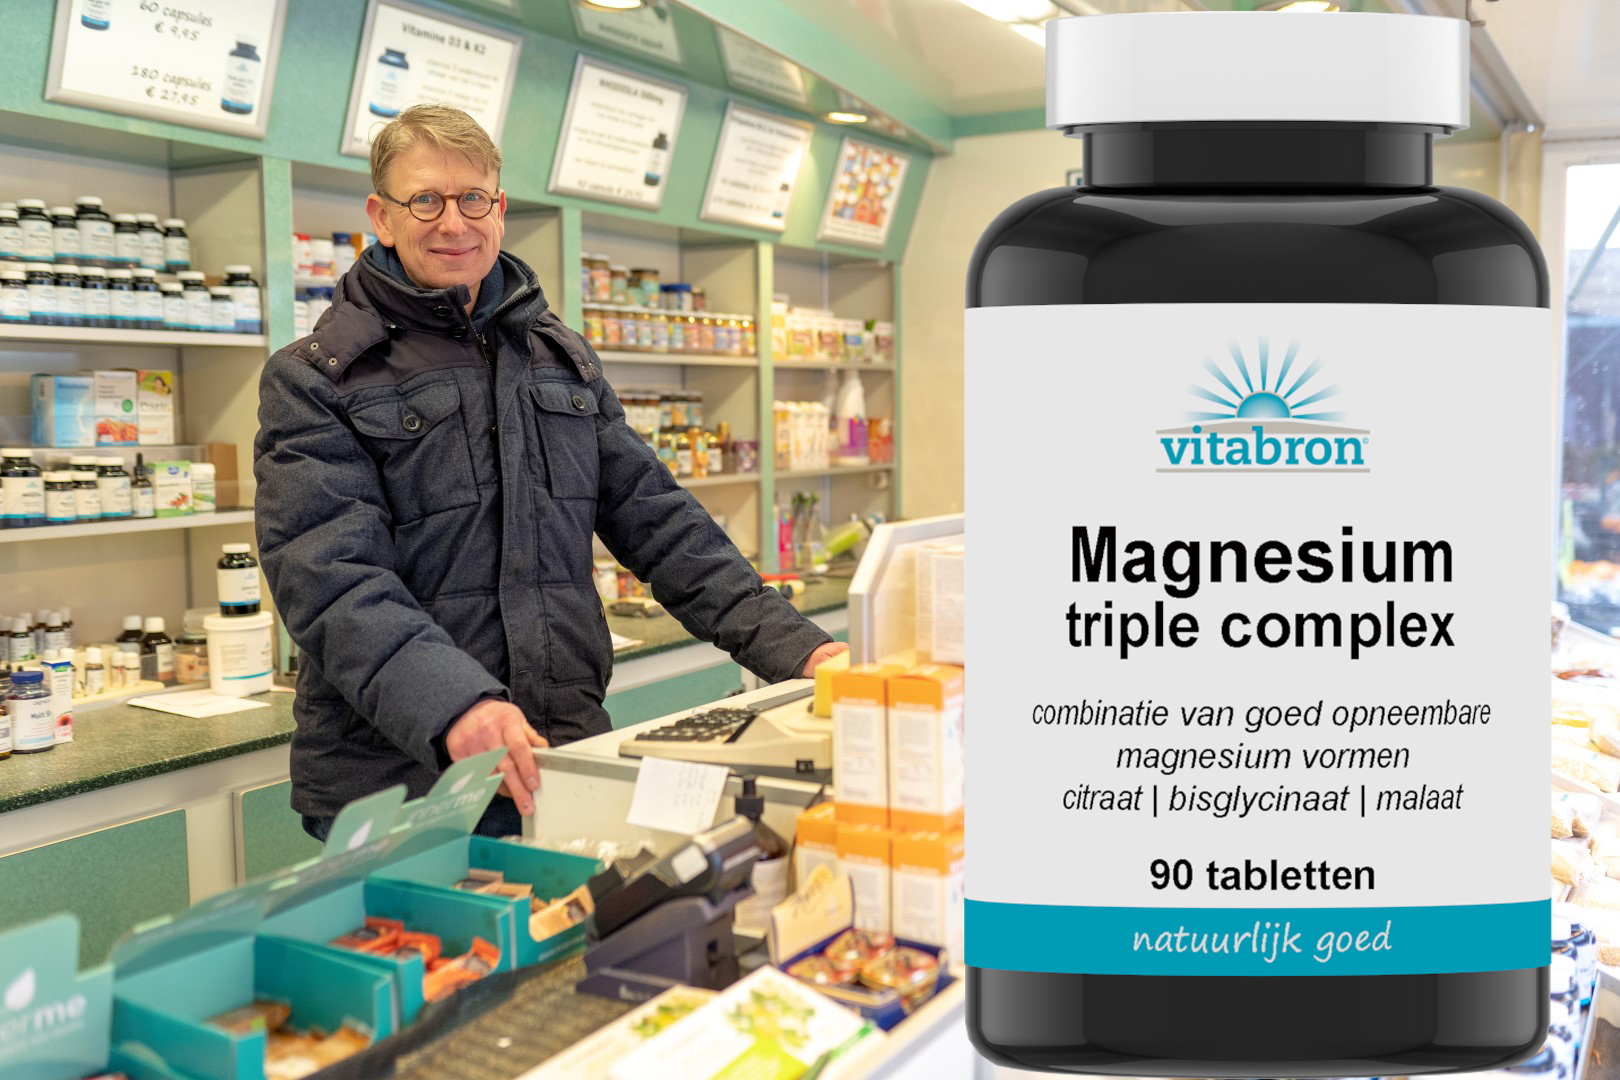 Promotion with the triple magnesium complex in Hans Gomelt on the market in Plasserdam